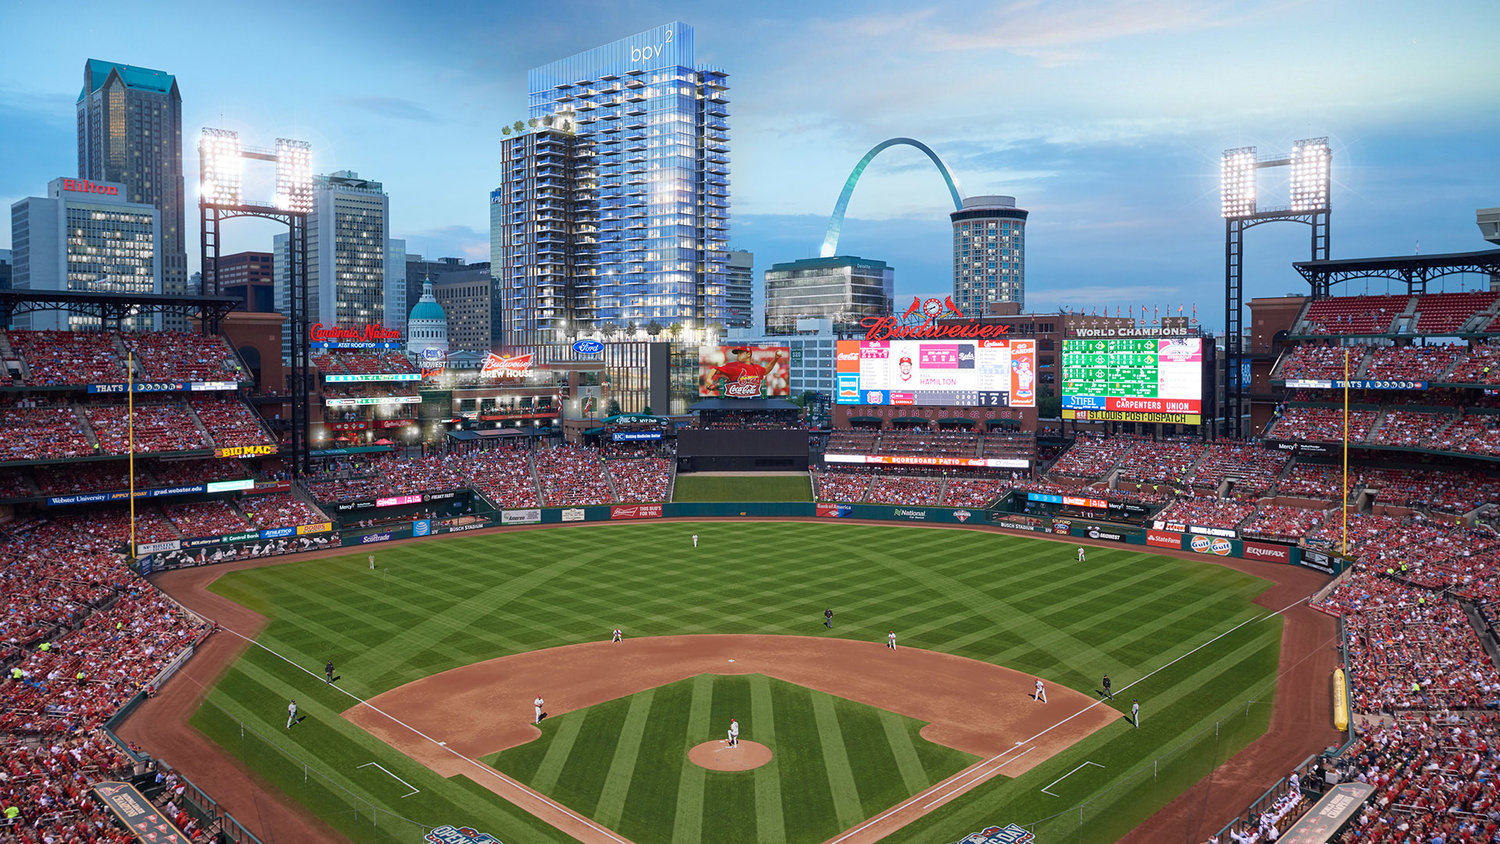 St. Louis Cardinals adding upgraded video boards at Busch Stadium